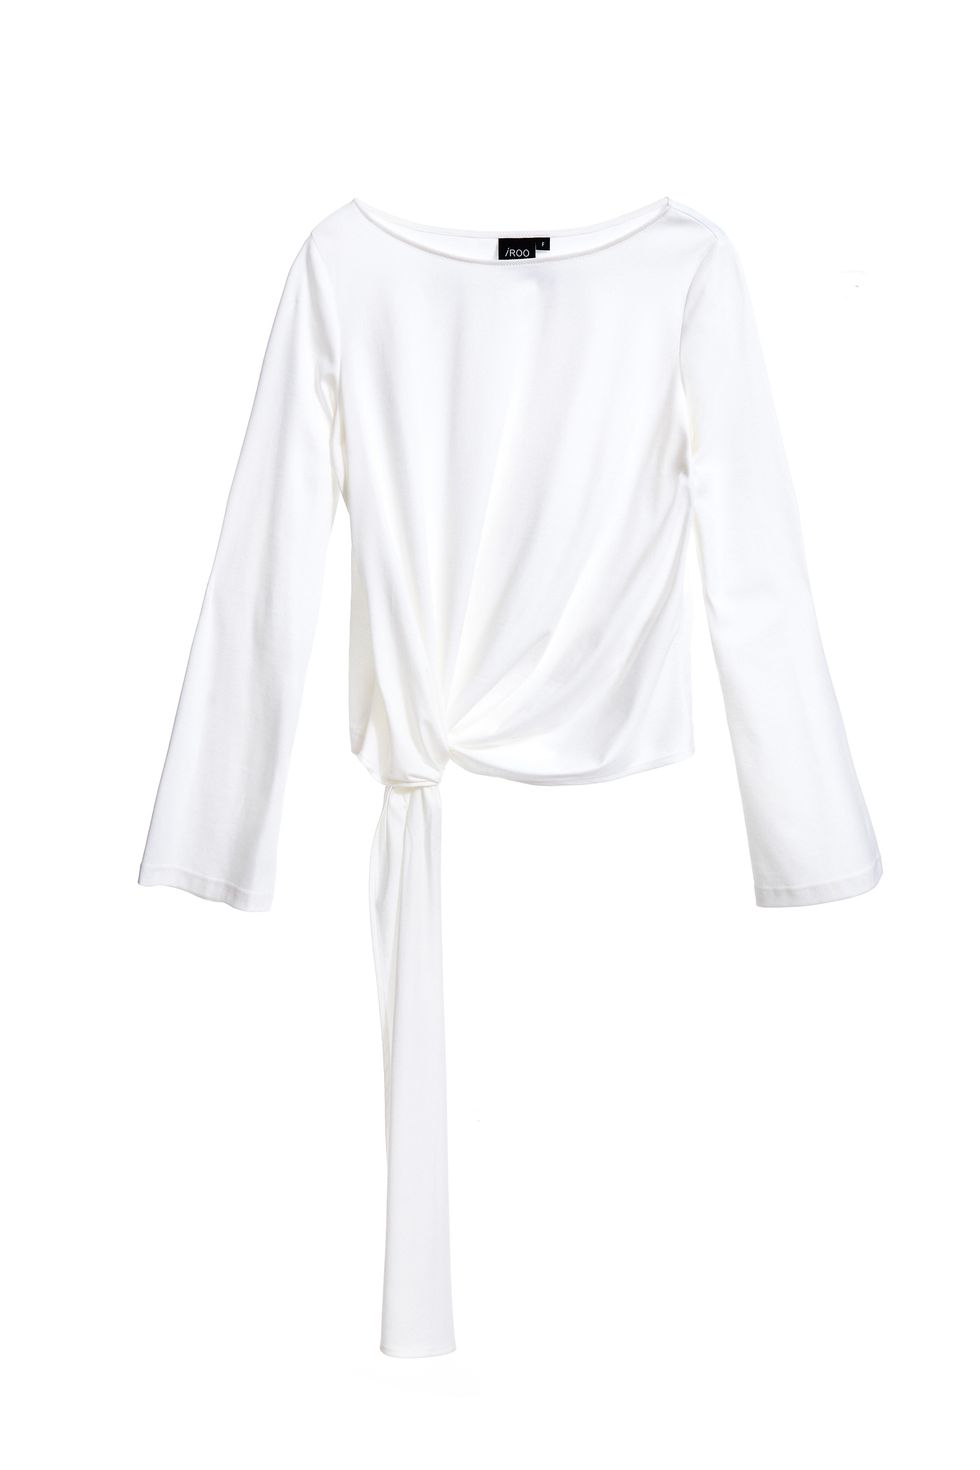 Clothing, White, Sleeve, Shoulder, Outerwear, T-shirt, Neck, Blouse, Top, Crop top, 